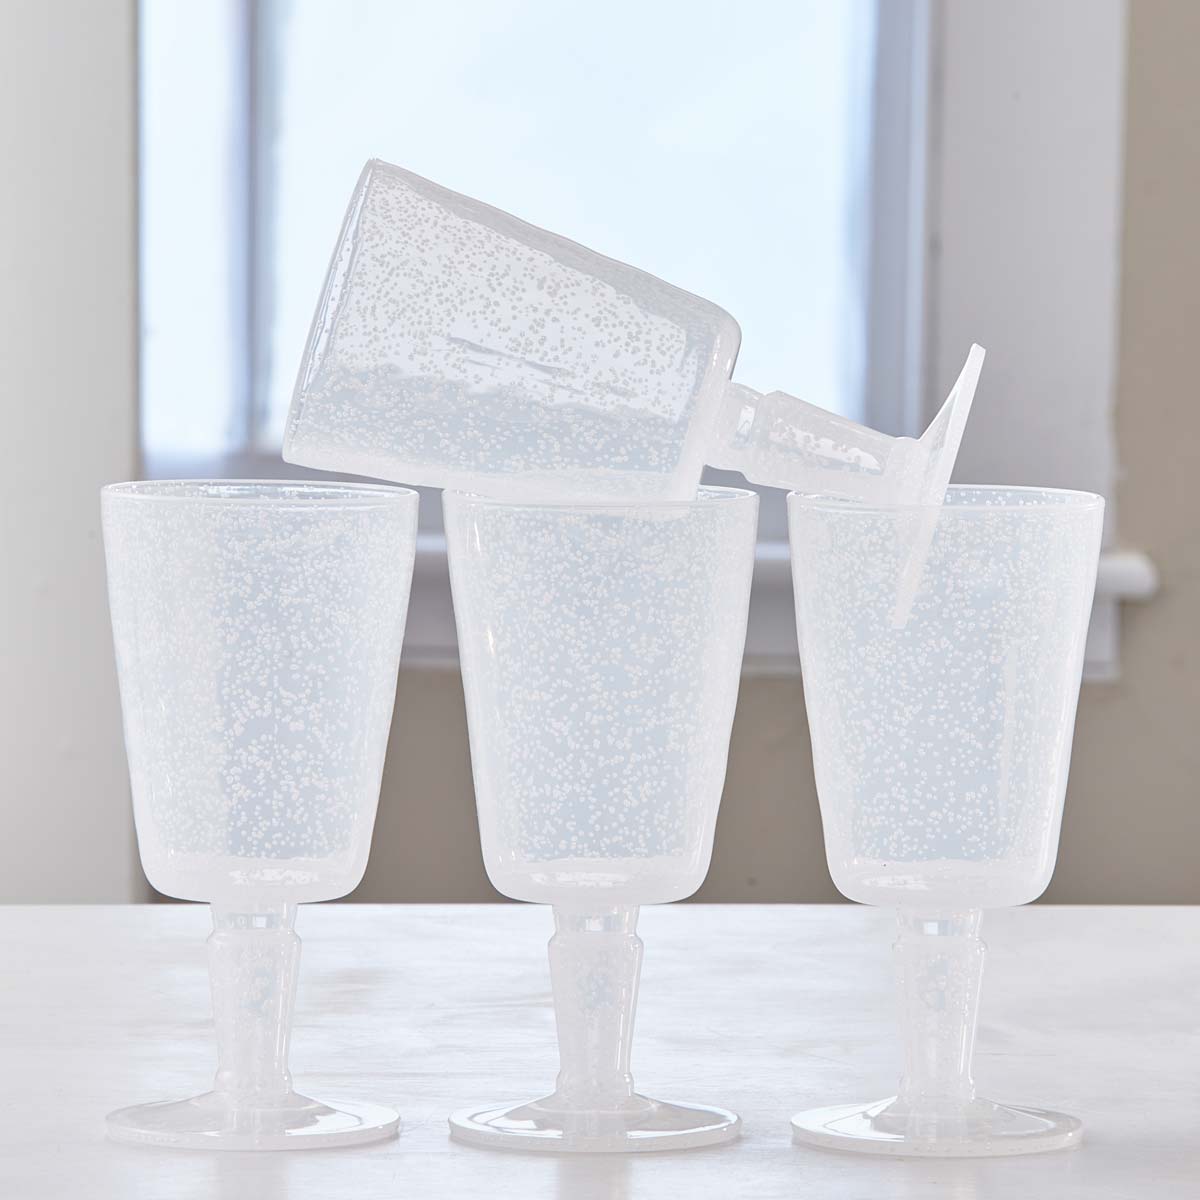 ACRYLIC GOBLETS - CLOUD WHITE, SET of 4